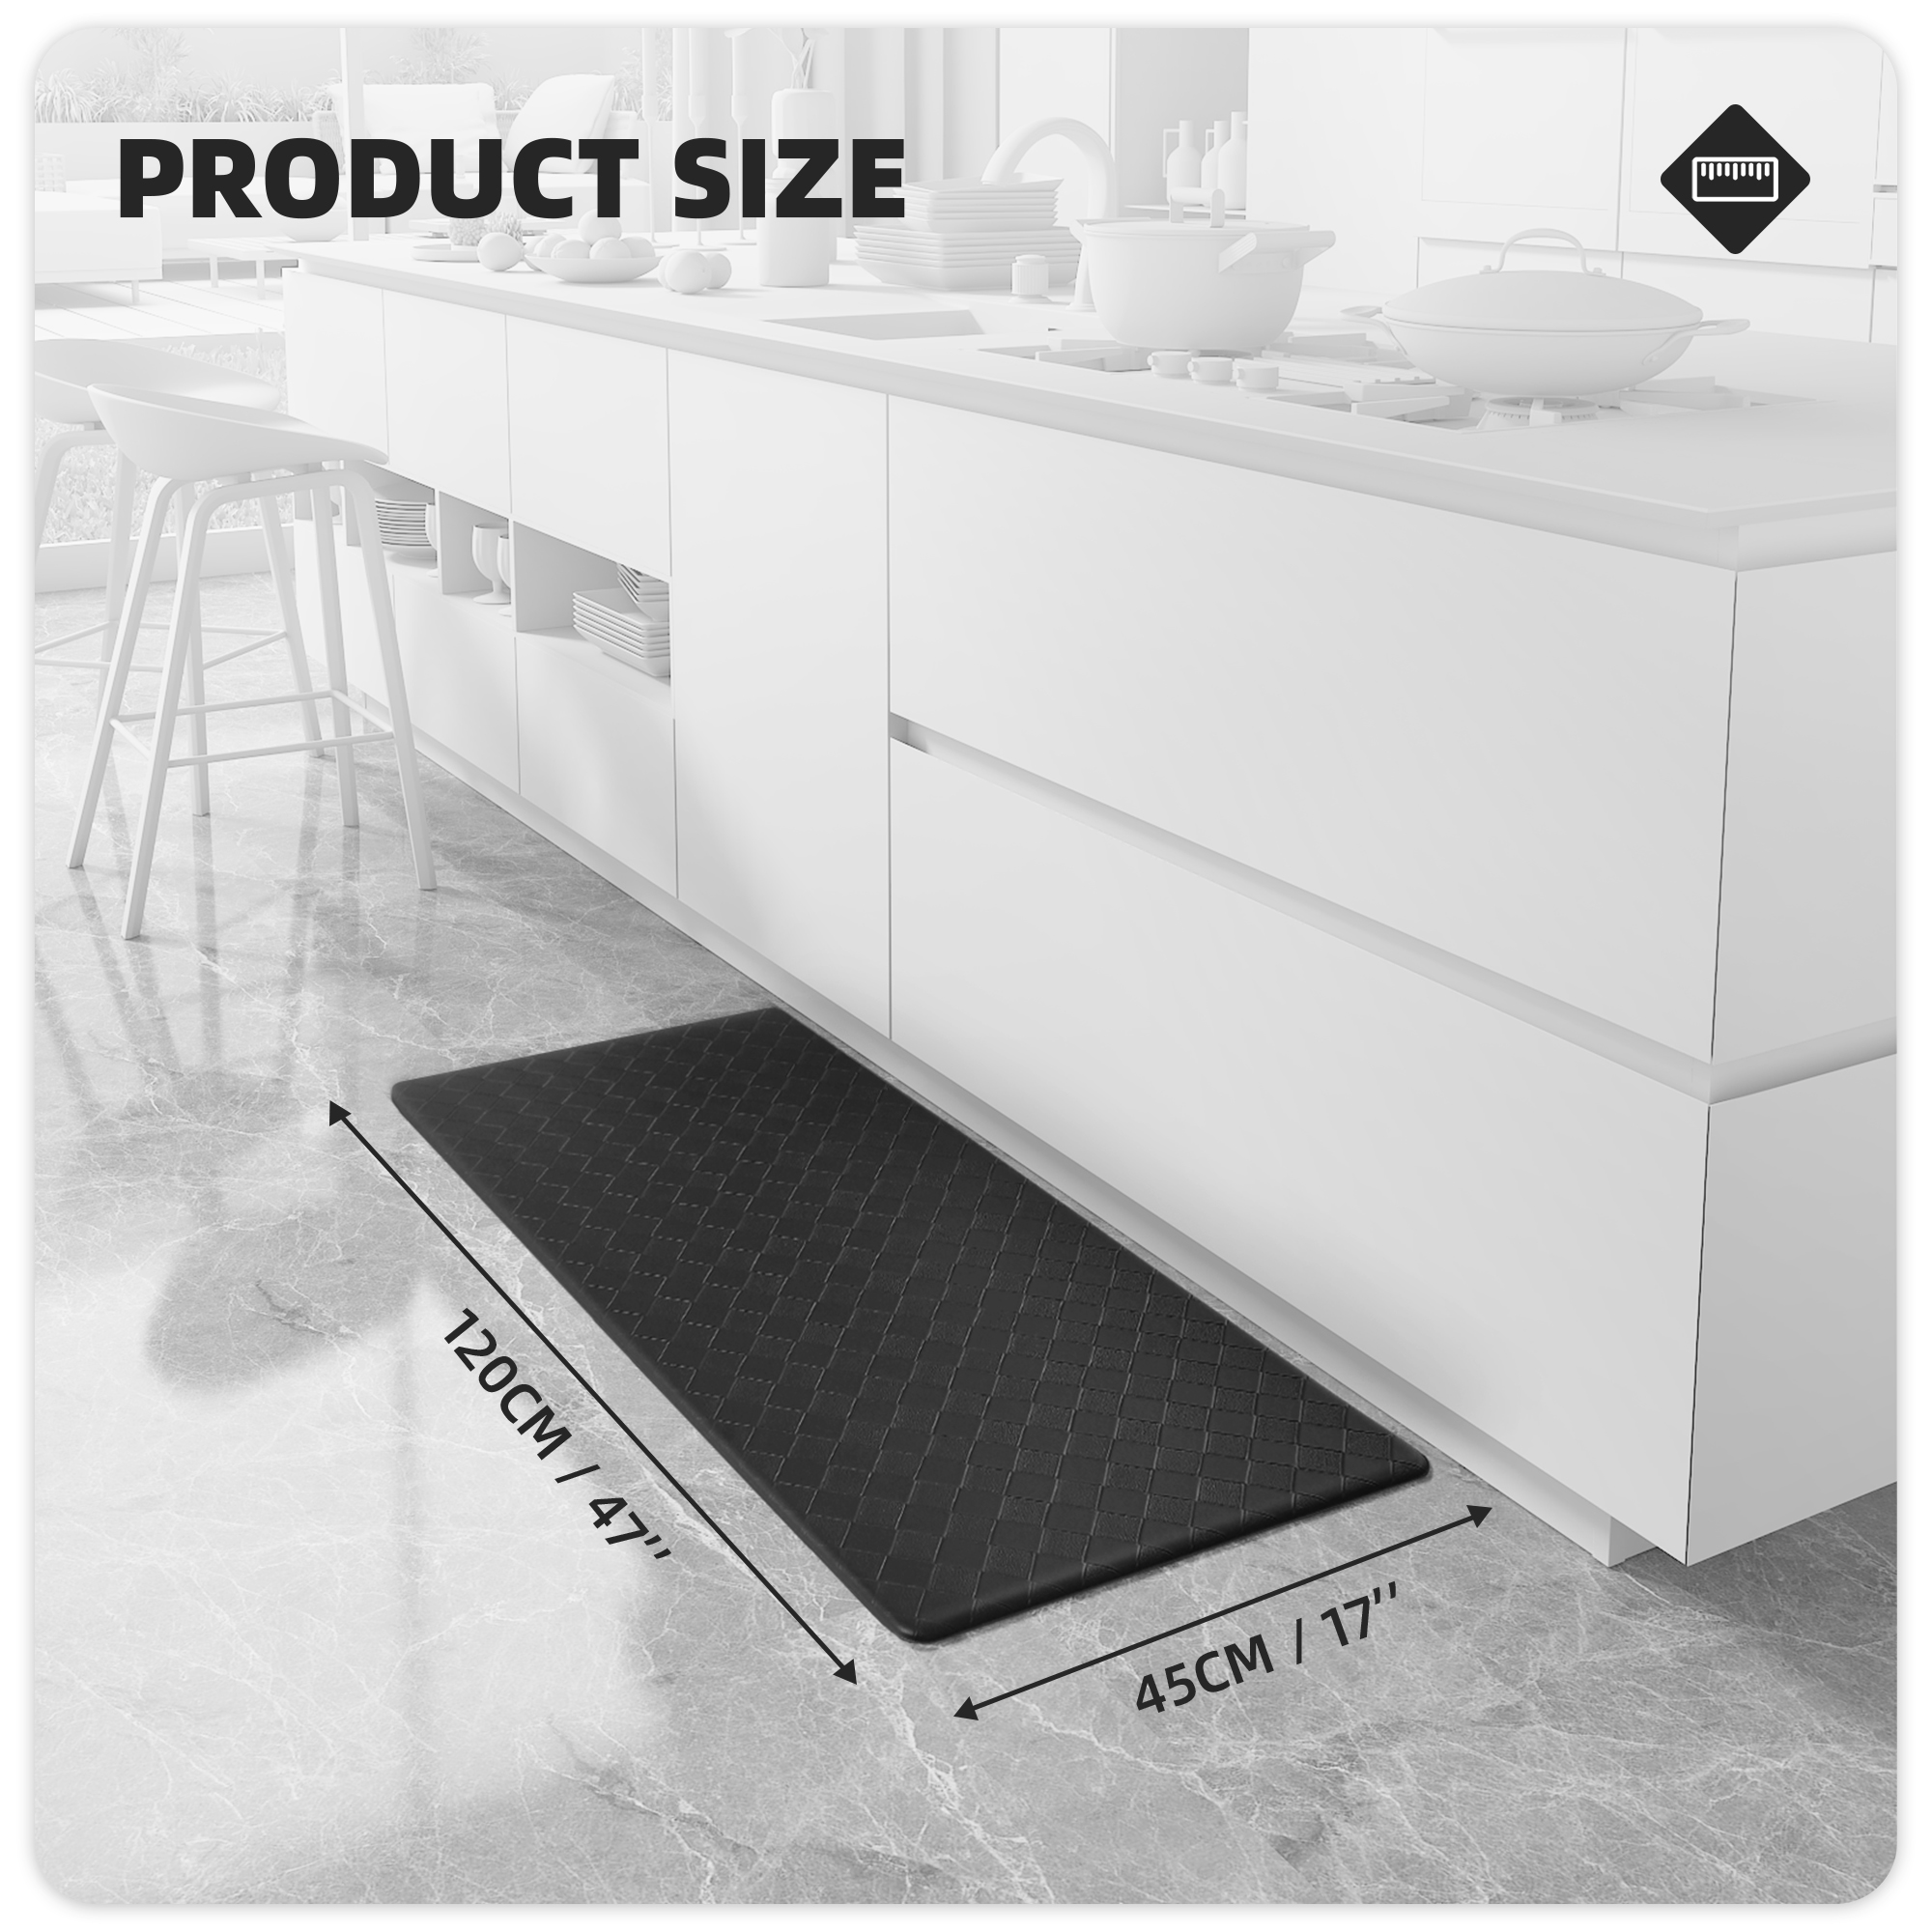 PABUBE Kitchen Mat Cushioned Anti Fatigue Kitchen Rugs Waterproof Non-Slip Comfort Standing Mat for Kitchen, Floor, Office, Sink, Black, 17" x 47" - image 4 of 8